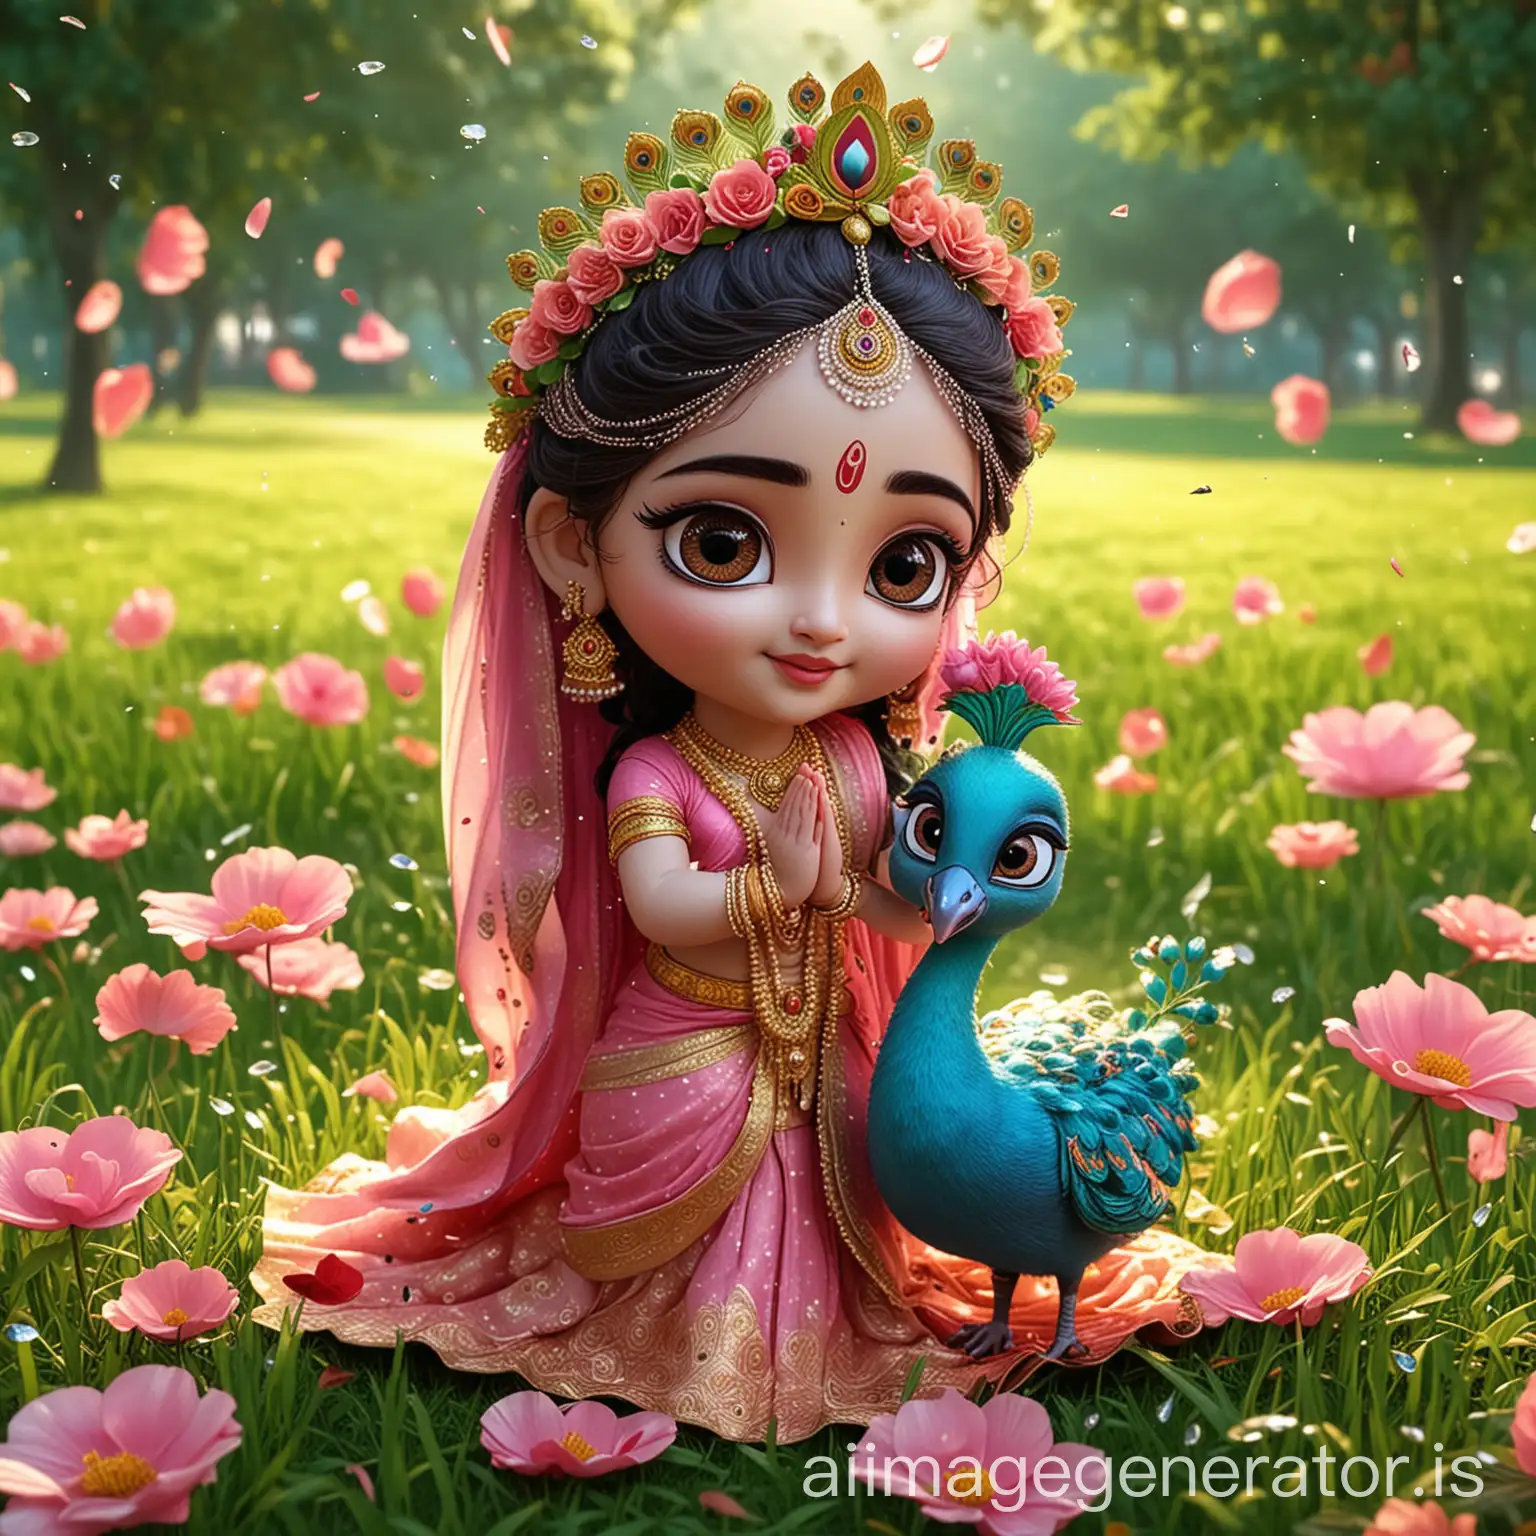 sri  krishna holdin the hands of Radha , the rose pettels are falling they are standing on grass they are with cute face big eyes in animation , on head of Krishna there is a peacock feather